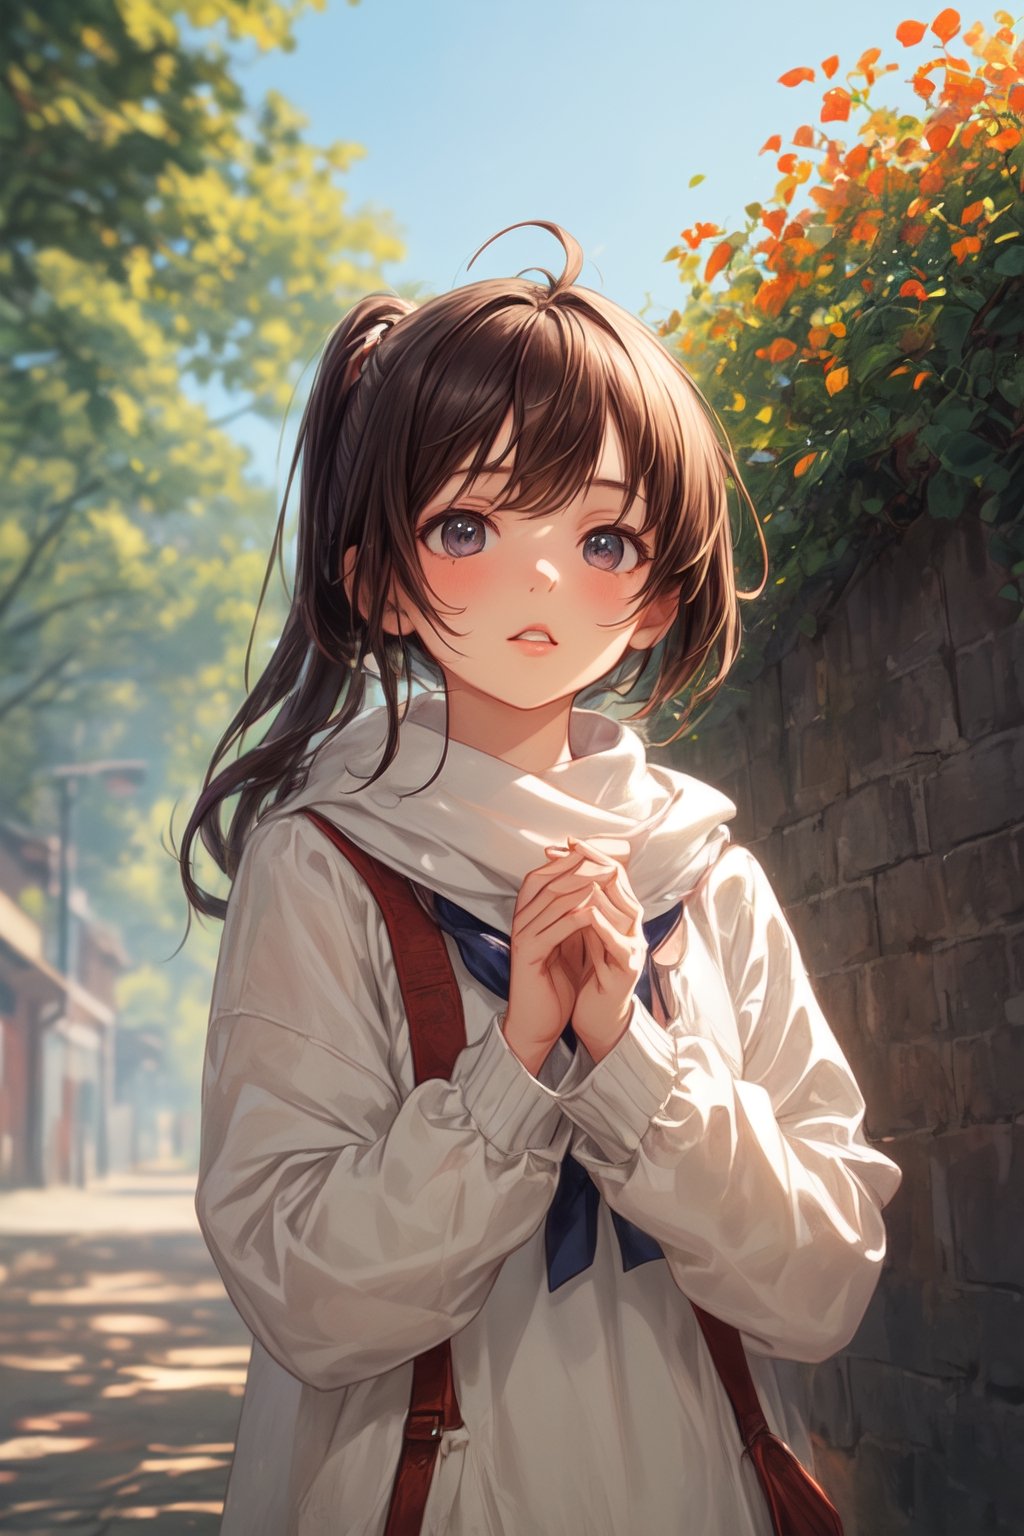 Anime-style illustration of a high school girl with a ponytail, standing amidst vibrant autumn trees. She wears a cozy sweater and scarf, looking up with her hands shielding her eyes as if spotting a particularly beautiful tree branch., akemi